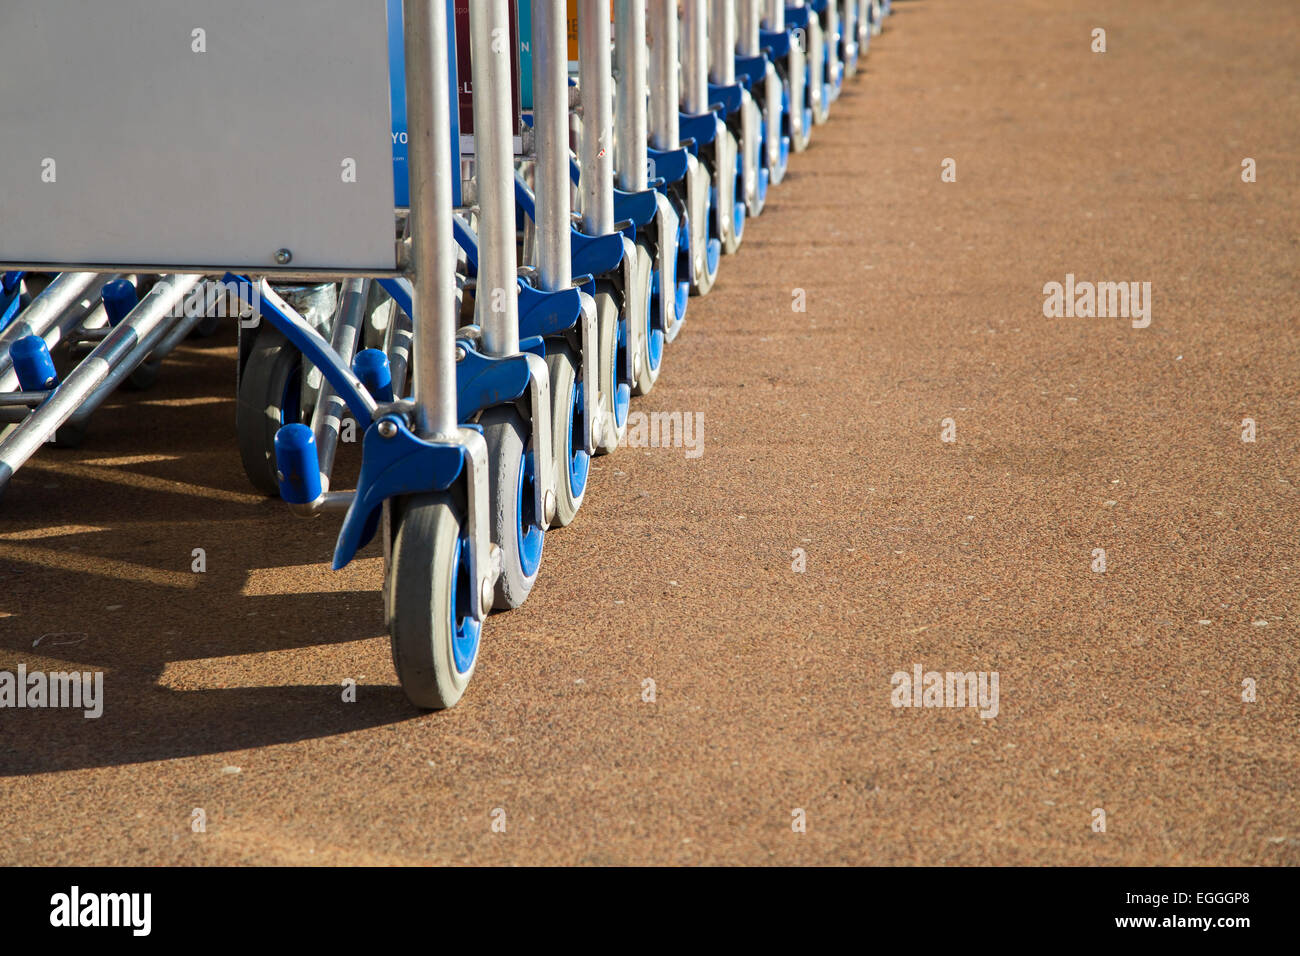 Row of luggage carts with advertisement space closeup view Stock Photo